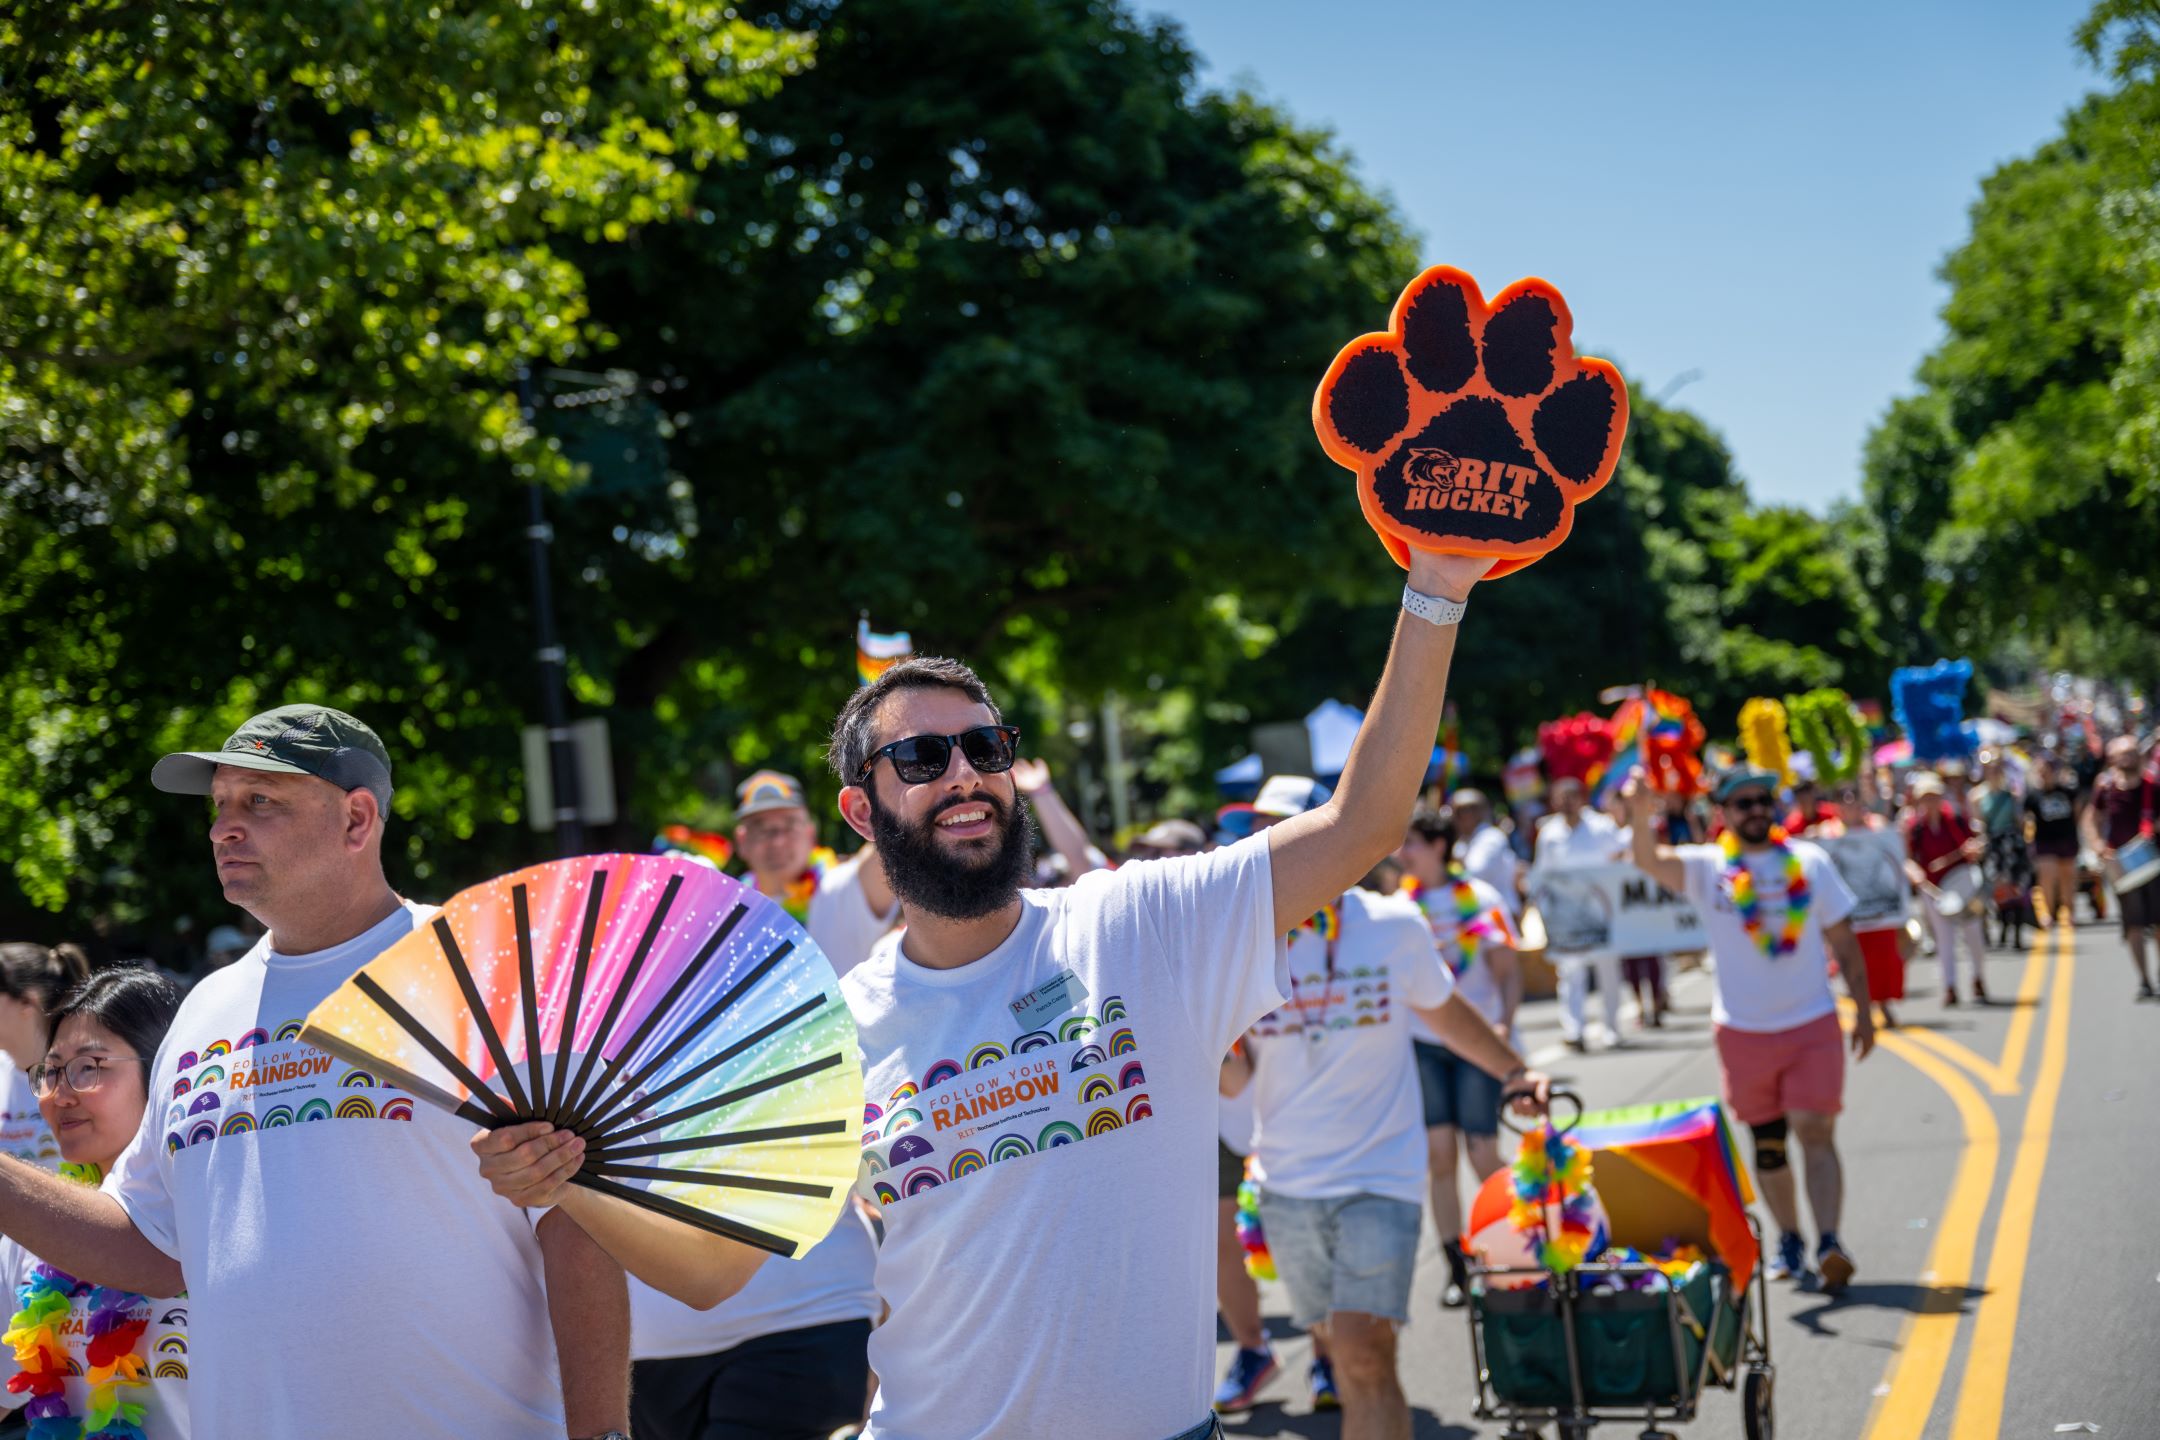 Man with beard walks in parade waving a rainbow fan and with a orange foam tiger paw. 